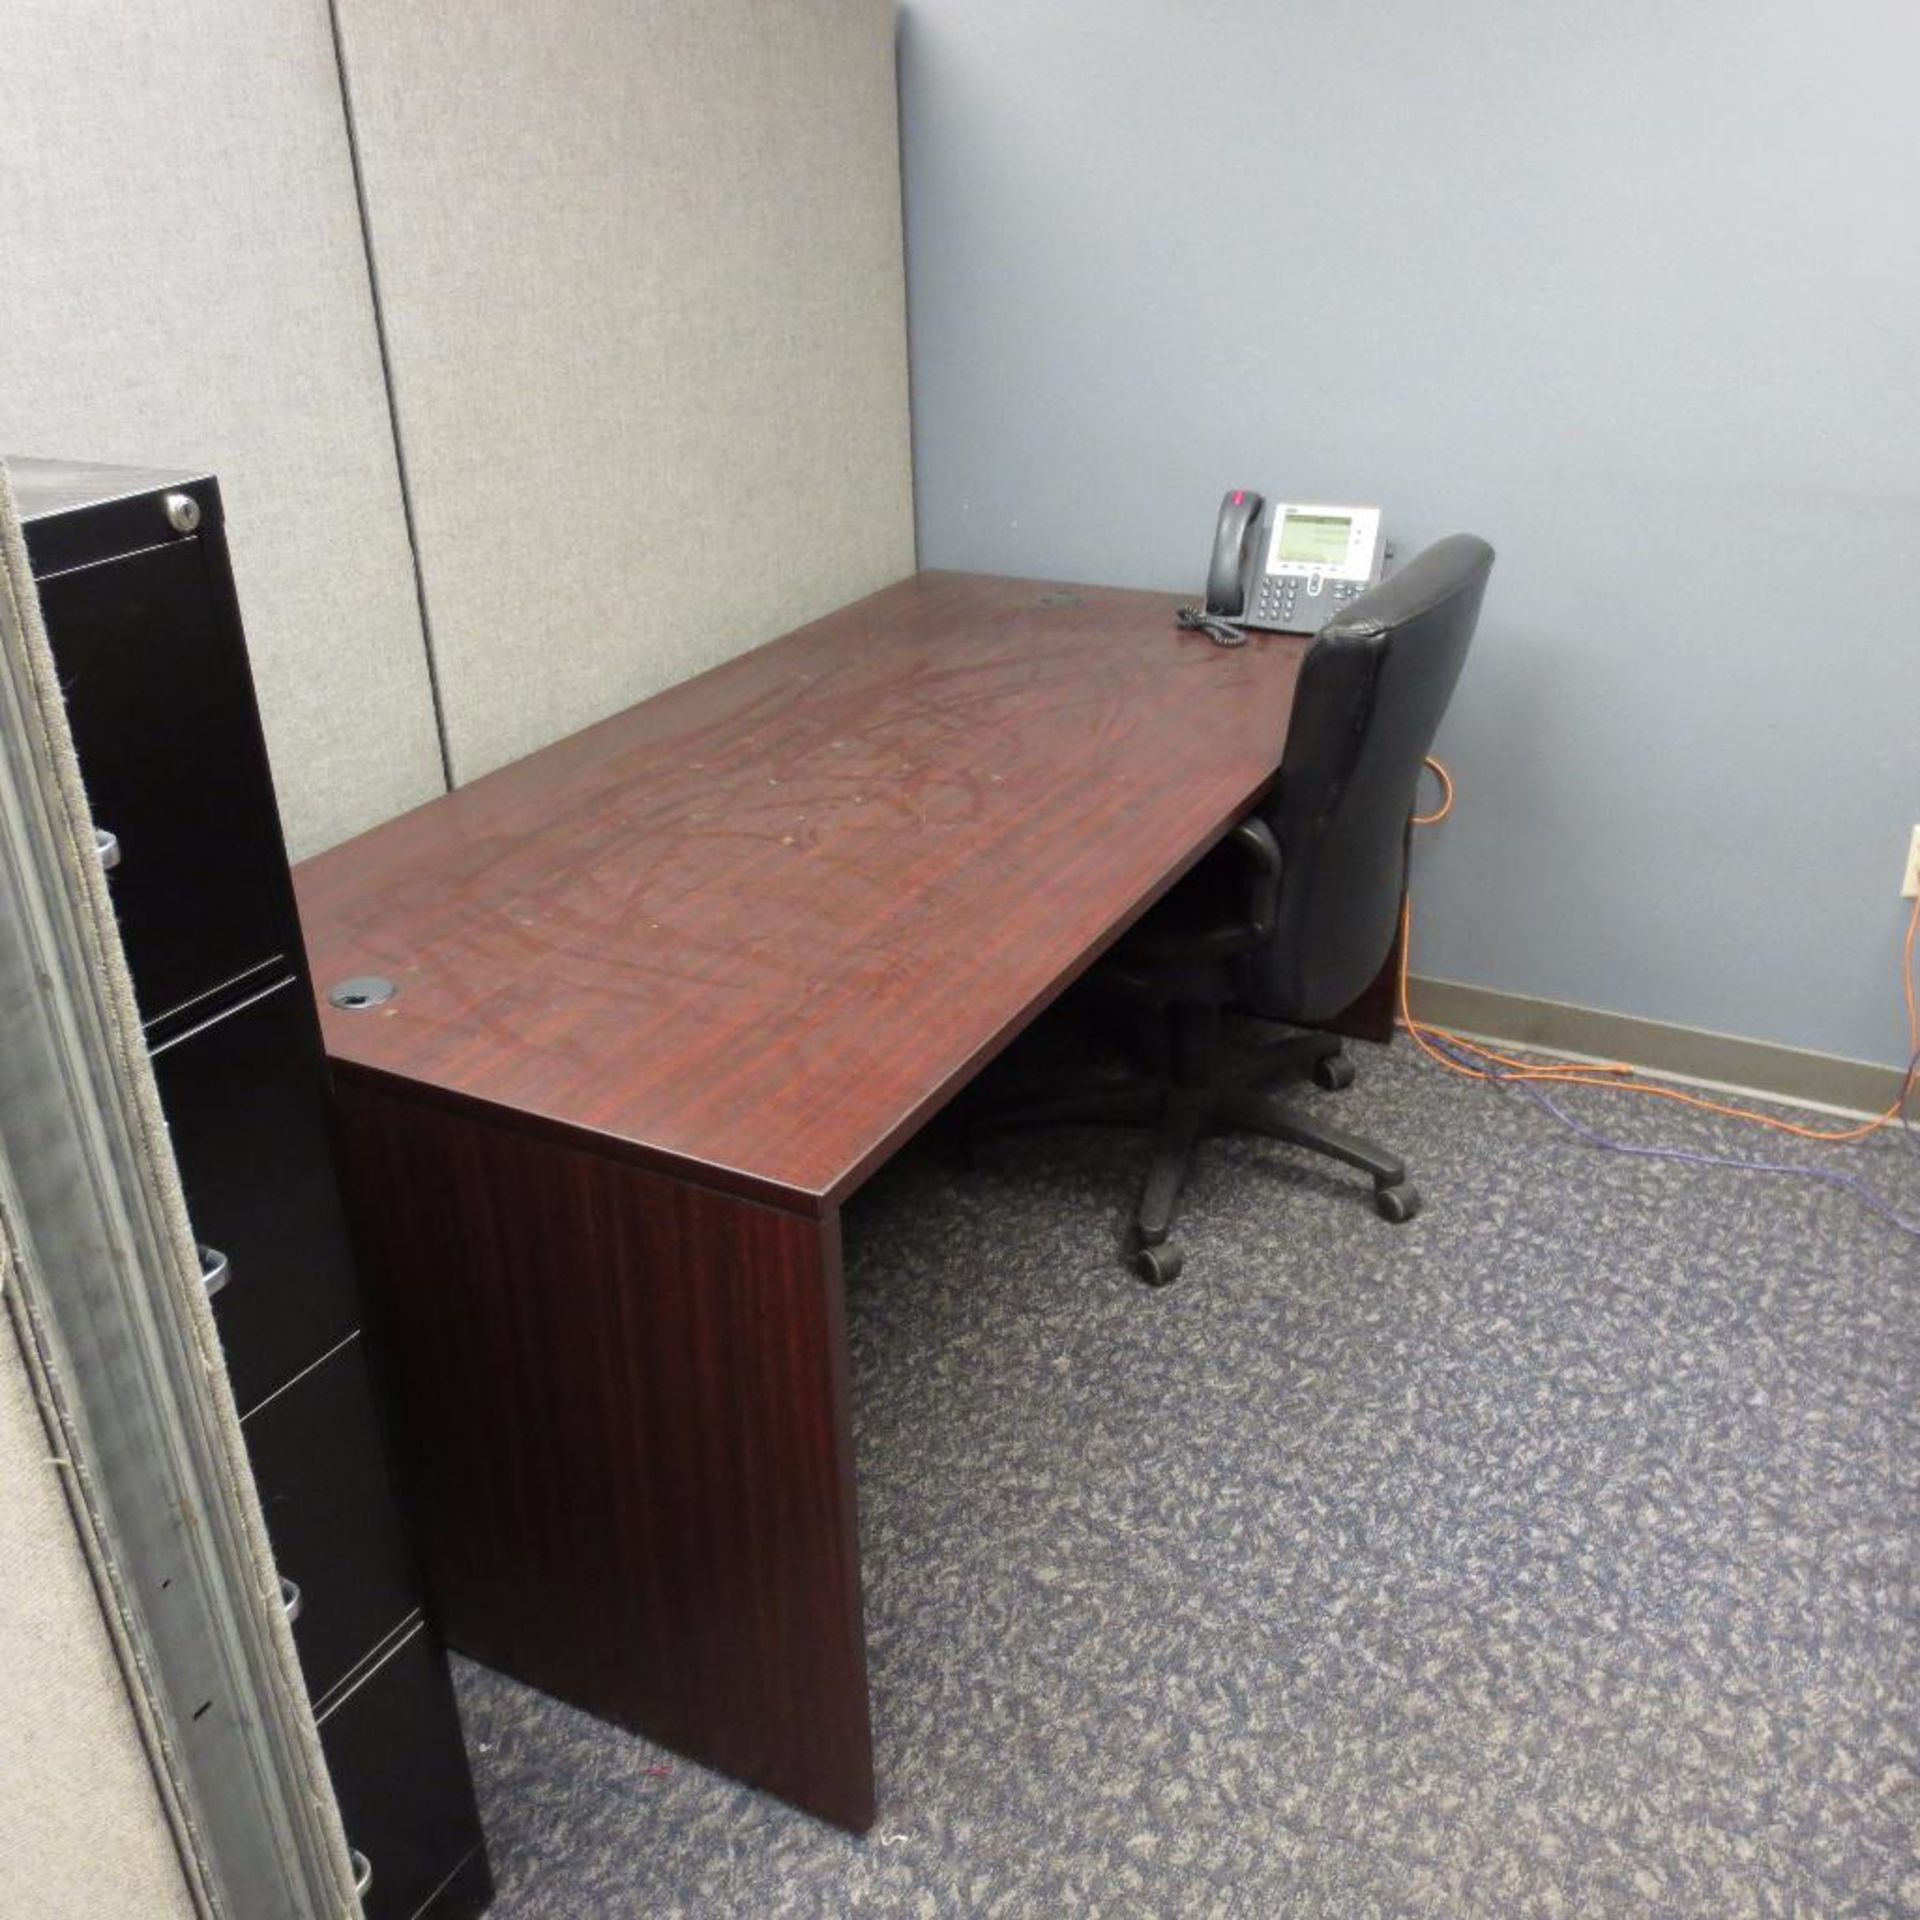 Office Dividers, Desk, File Cabinets and Chairs - Image 7 of 7